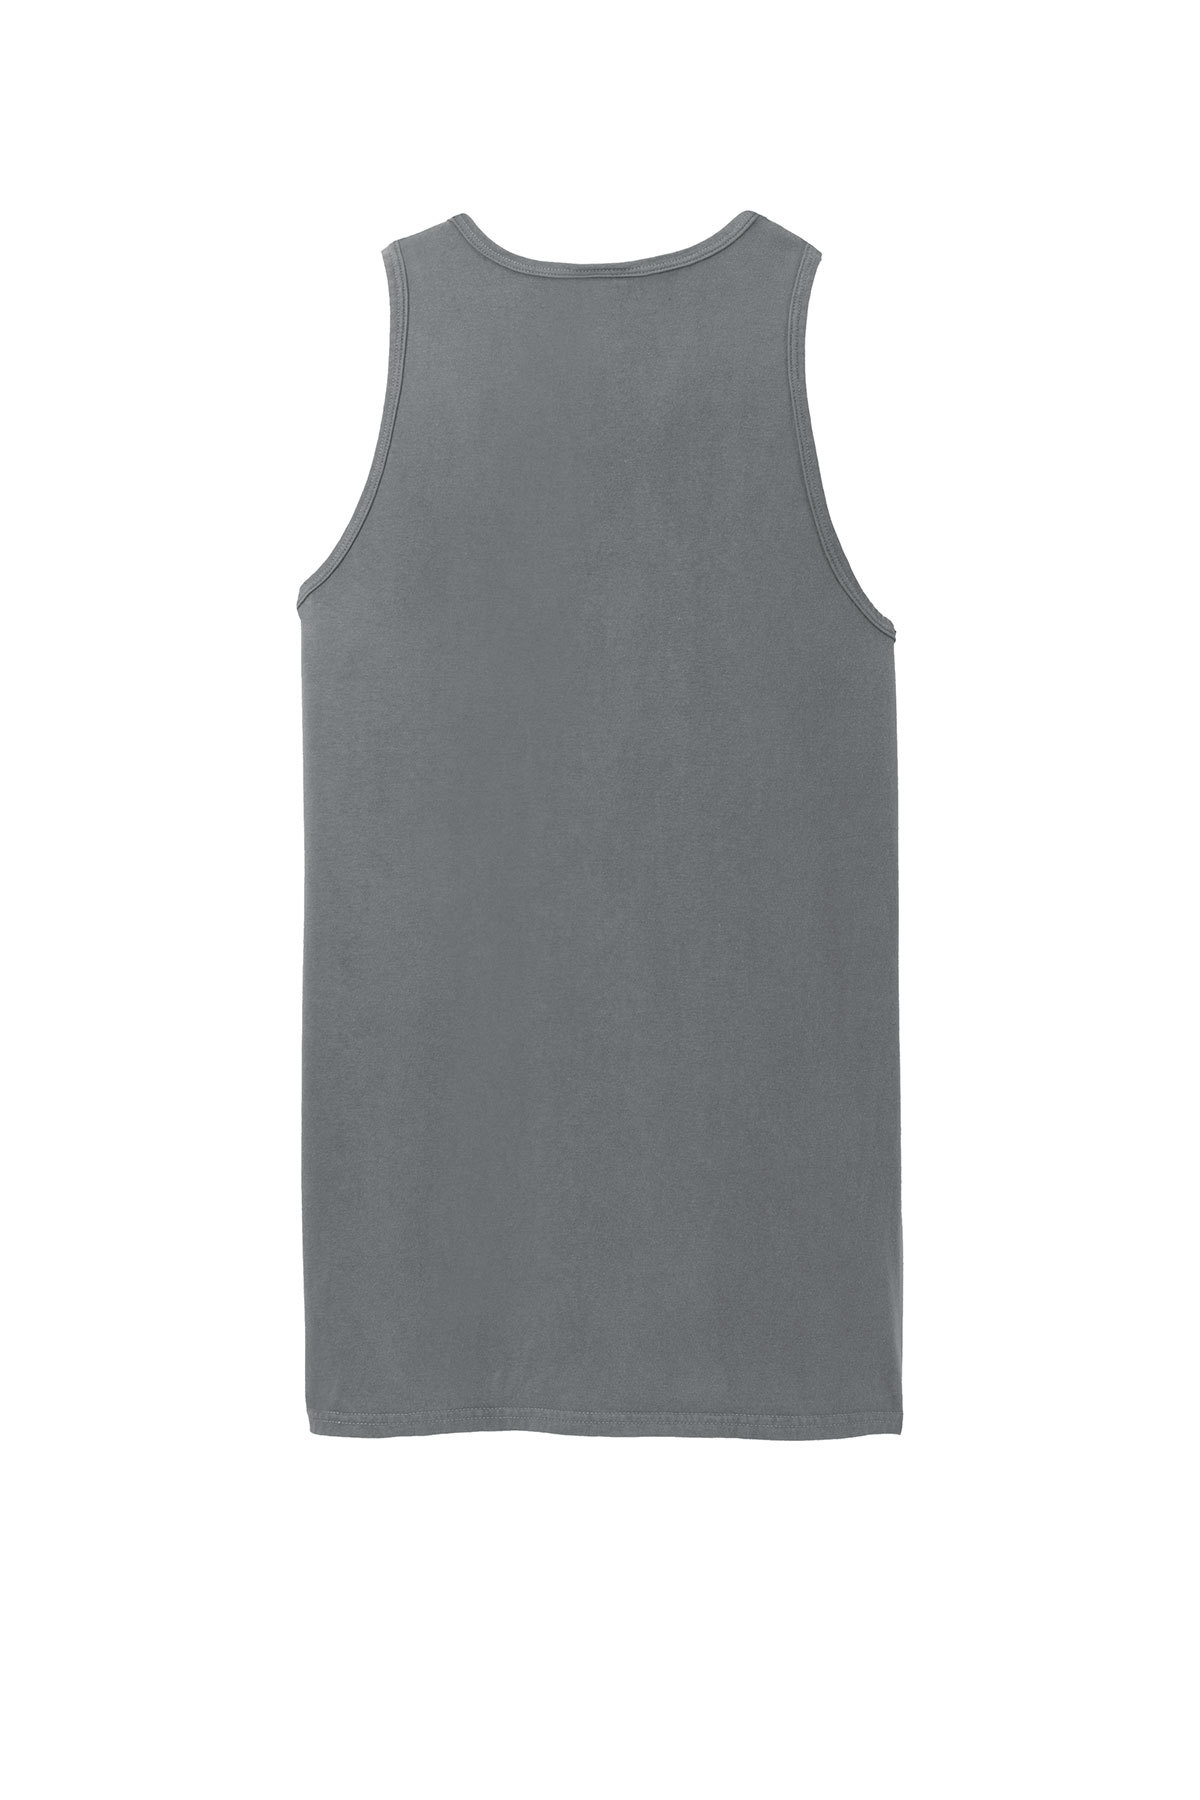 Port & Company Beach Wash Garment-Dyed Tank Top, Product